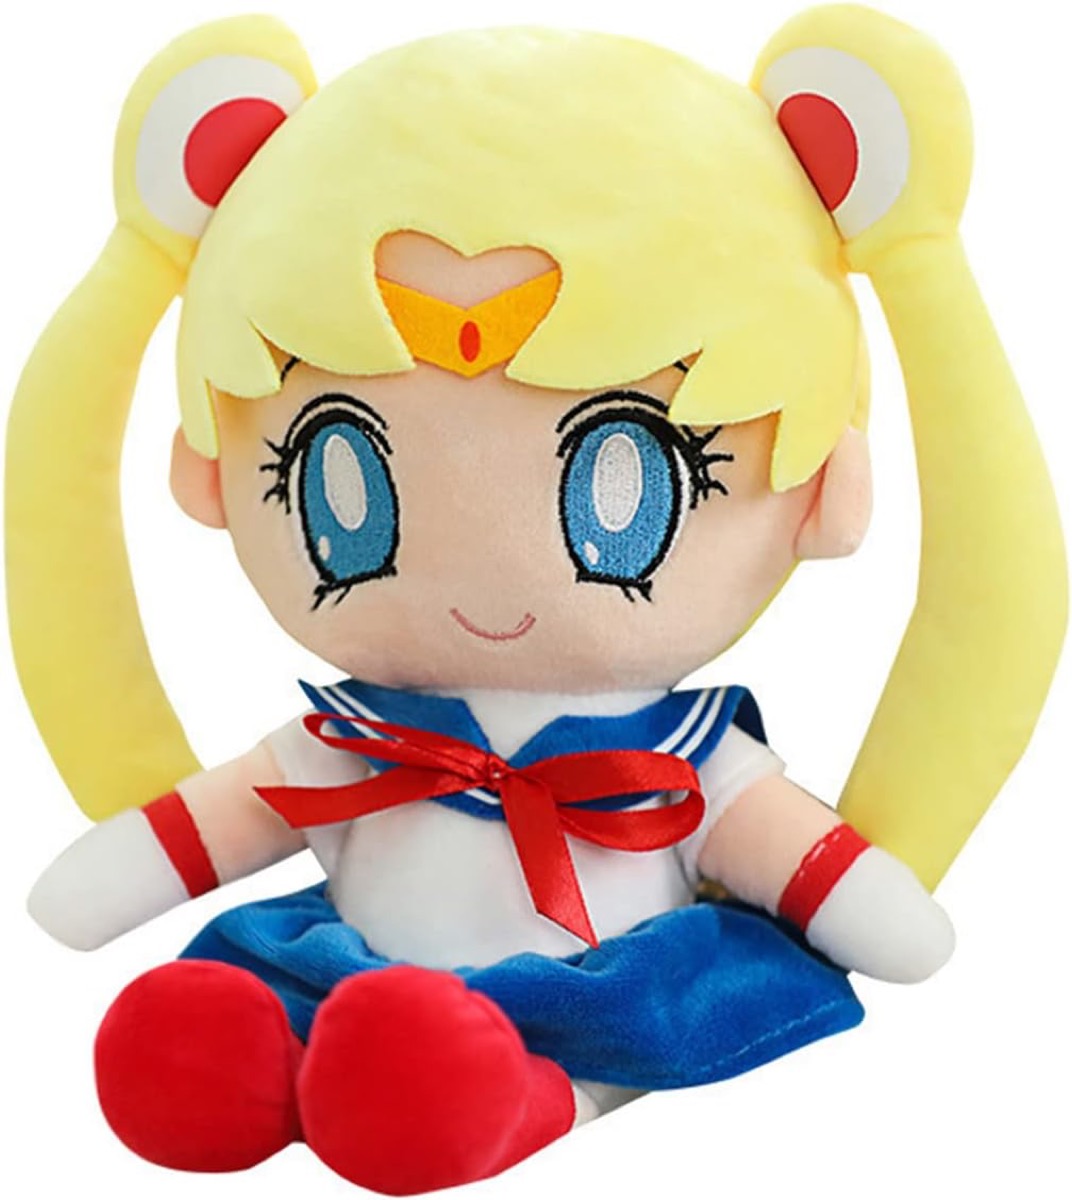 A plushie of Sailor Moon from "Sailor Moon" 